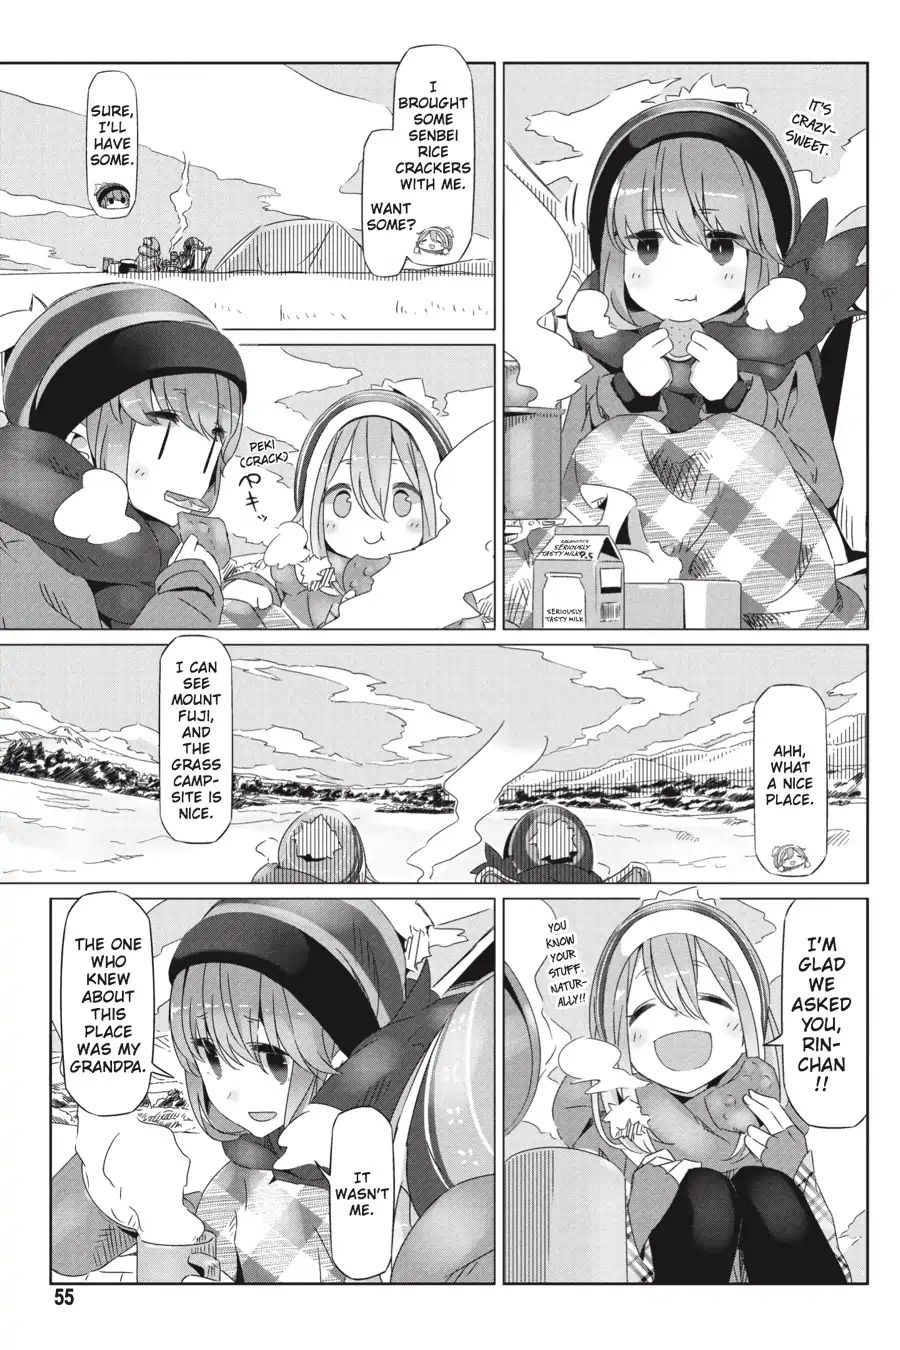 Yurucamp Vol.4 Chapter 20: The Impatient Camper and the Outdoor Snacks